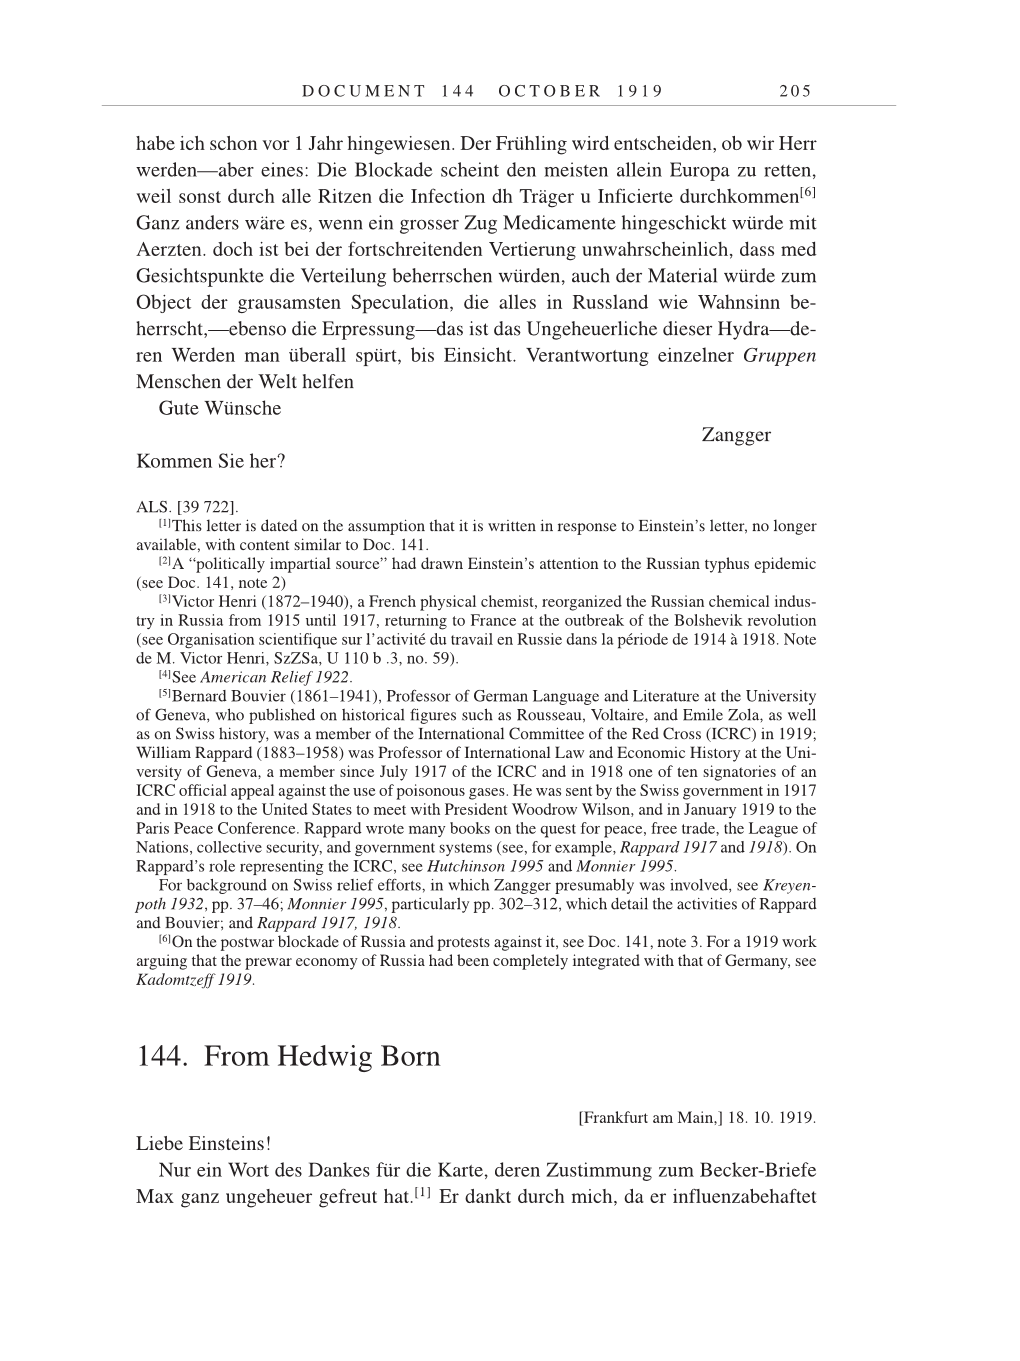 Volume 9: The Berlin Years: Correspondence January 1919-April 1920 page 205